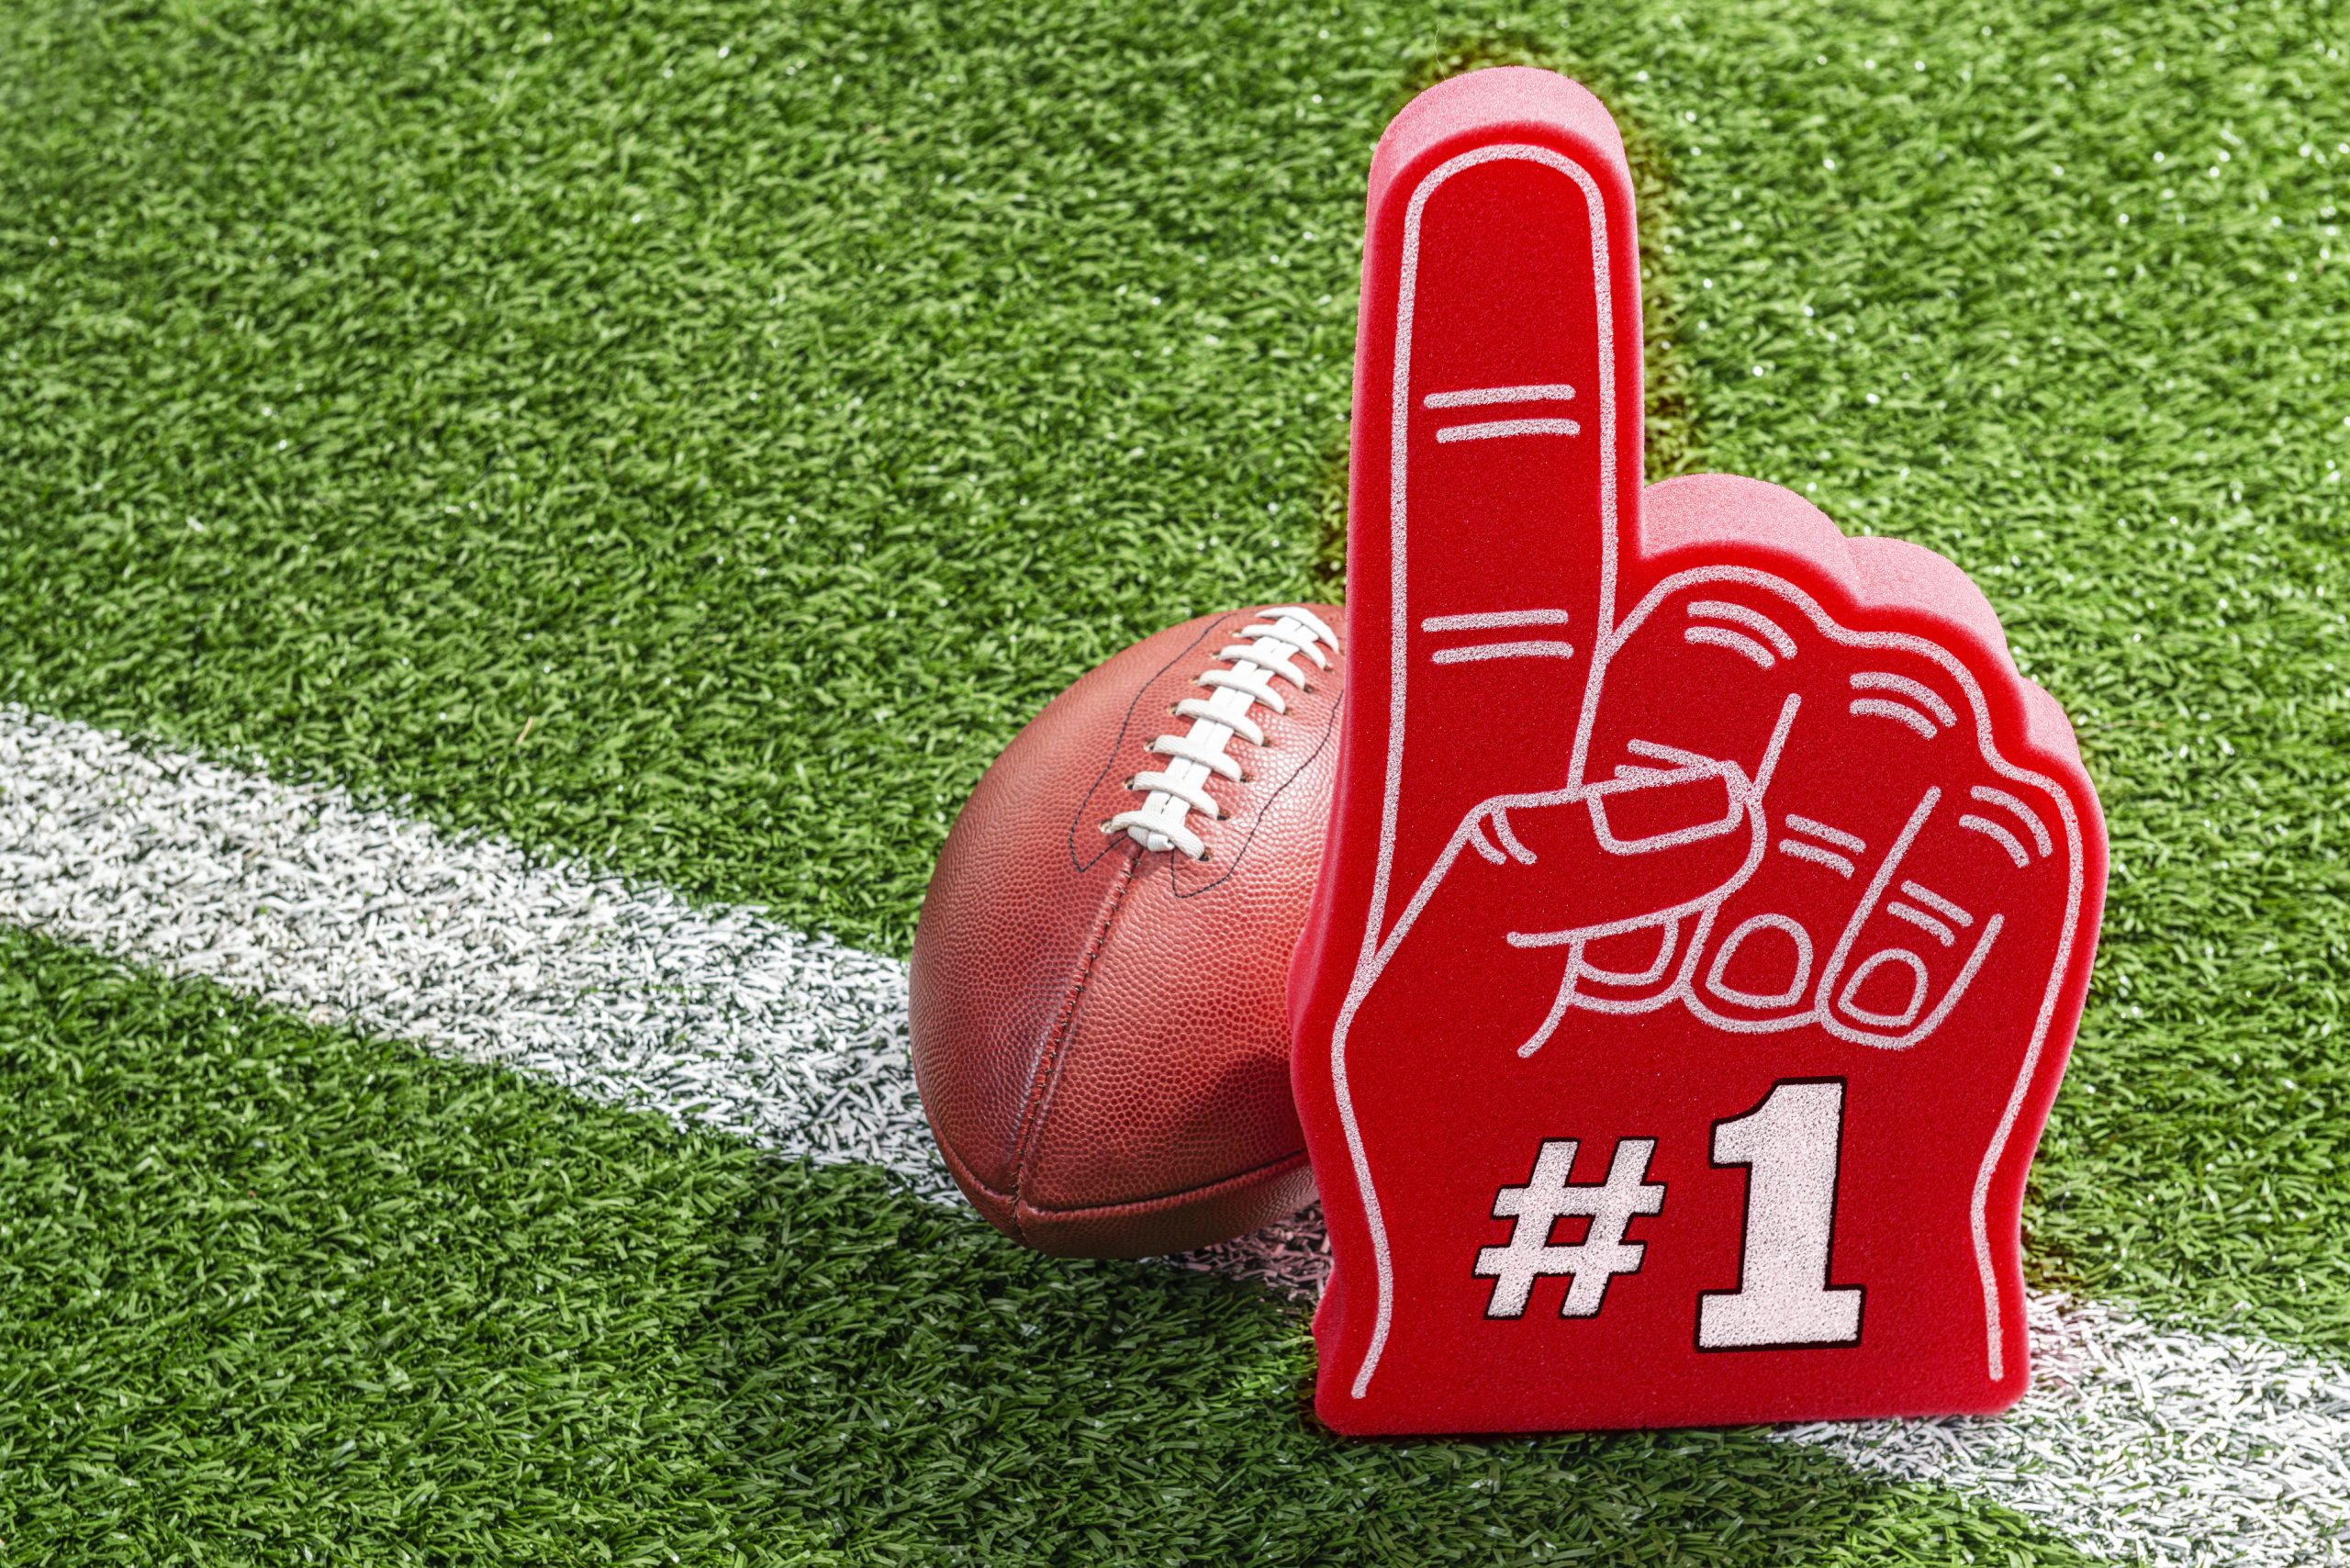 A red foam hand with a white #1 outlined in black sitting next to a leather American football that are both sitting on a white yard line on the stadium grass